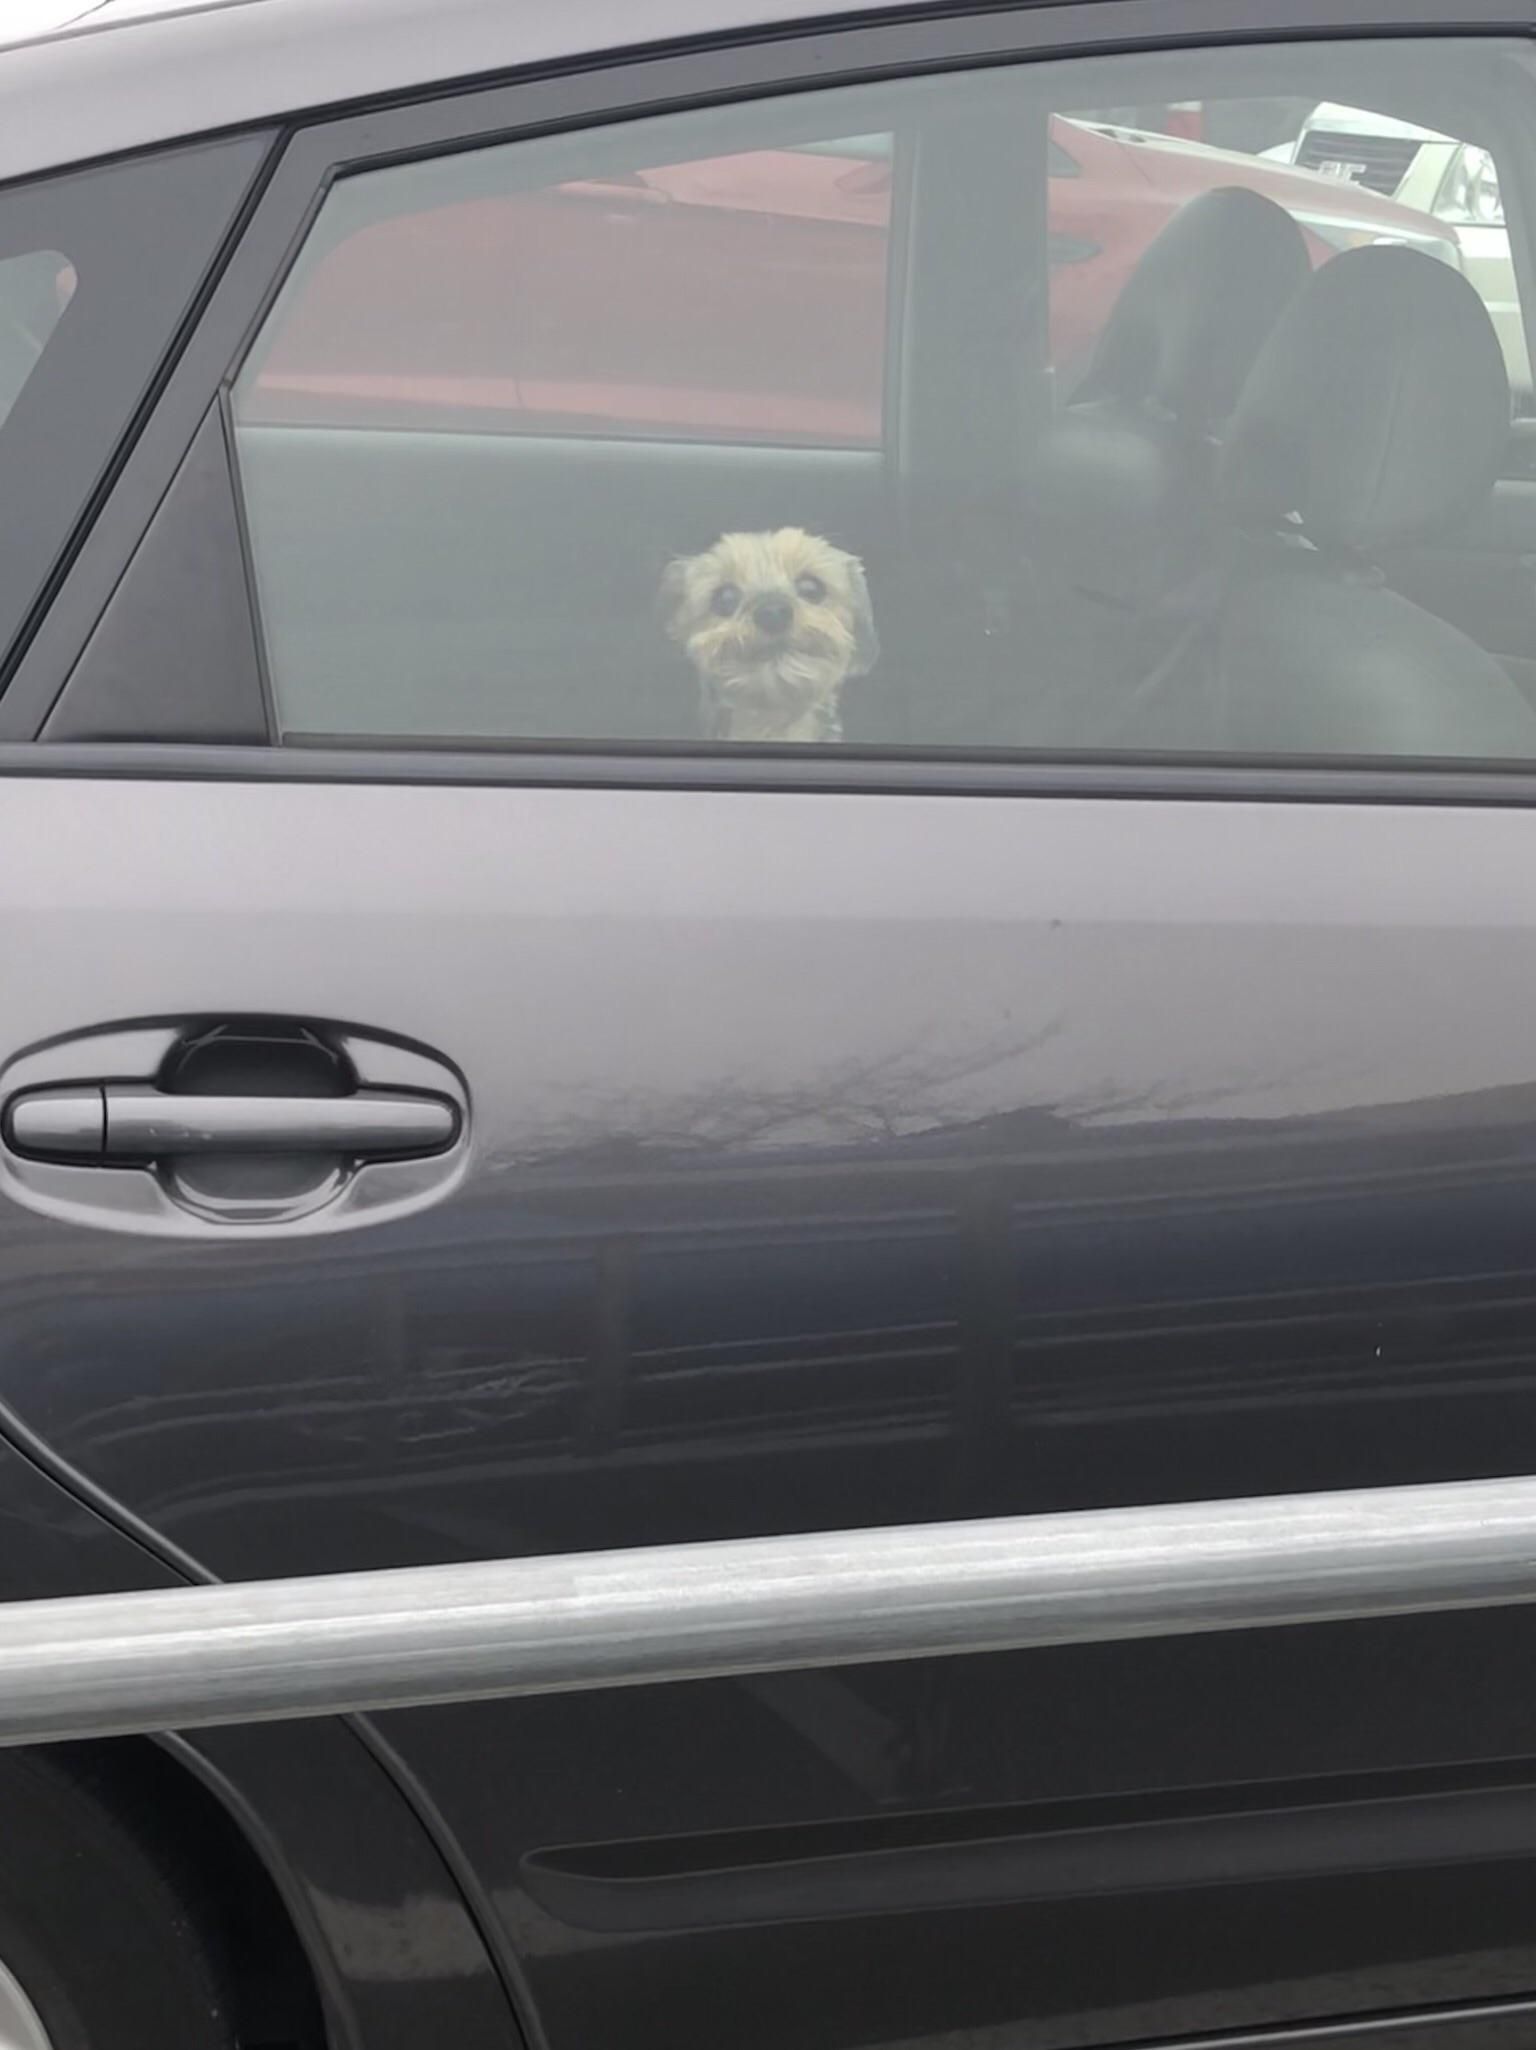 Getting out of my car today and this little gremlin is lookin back at me!